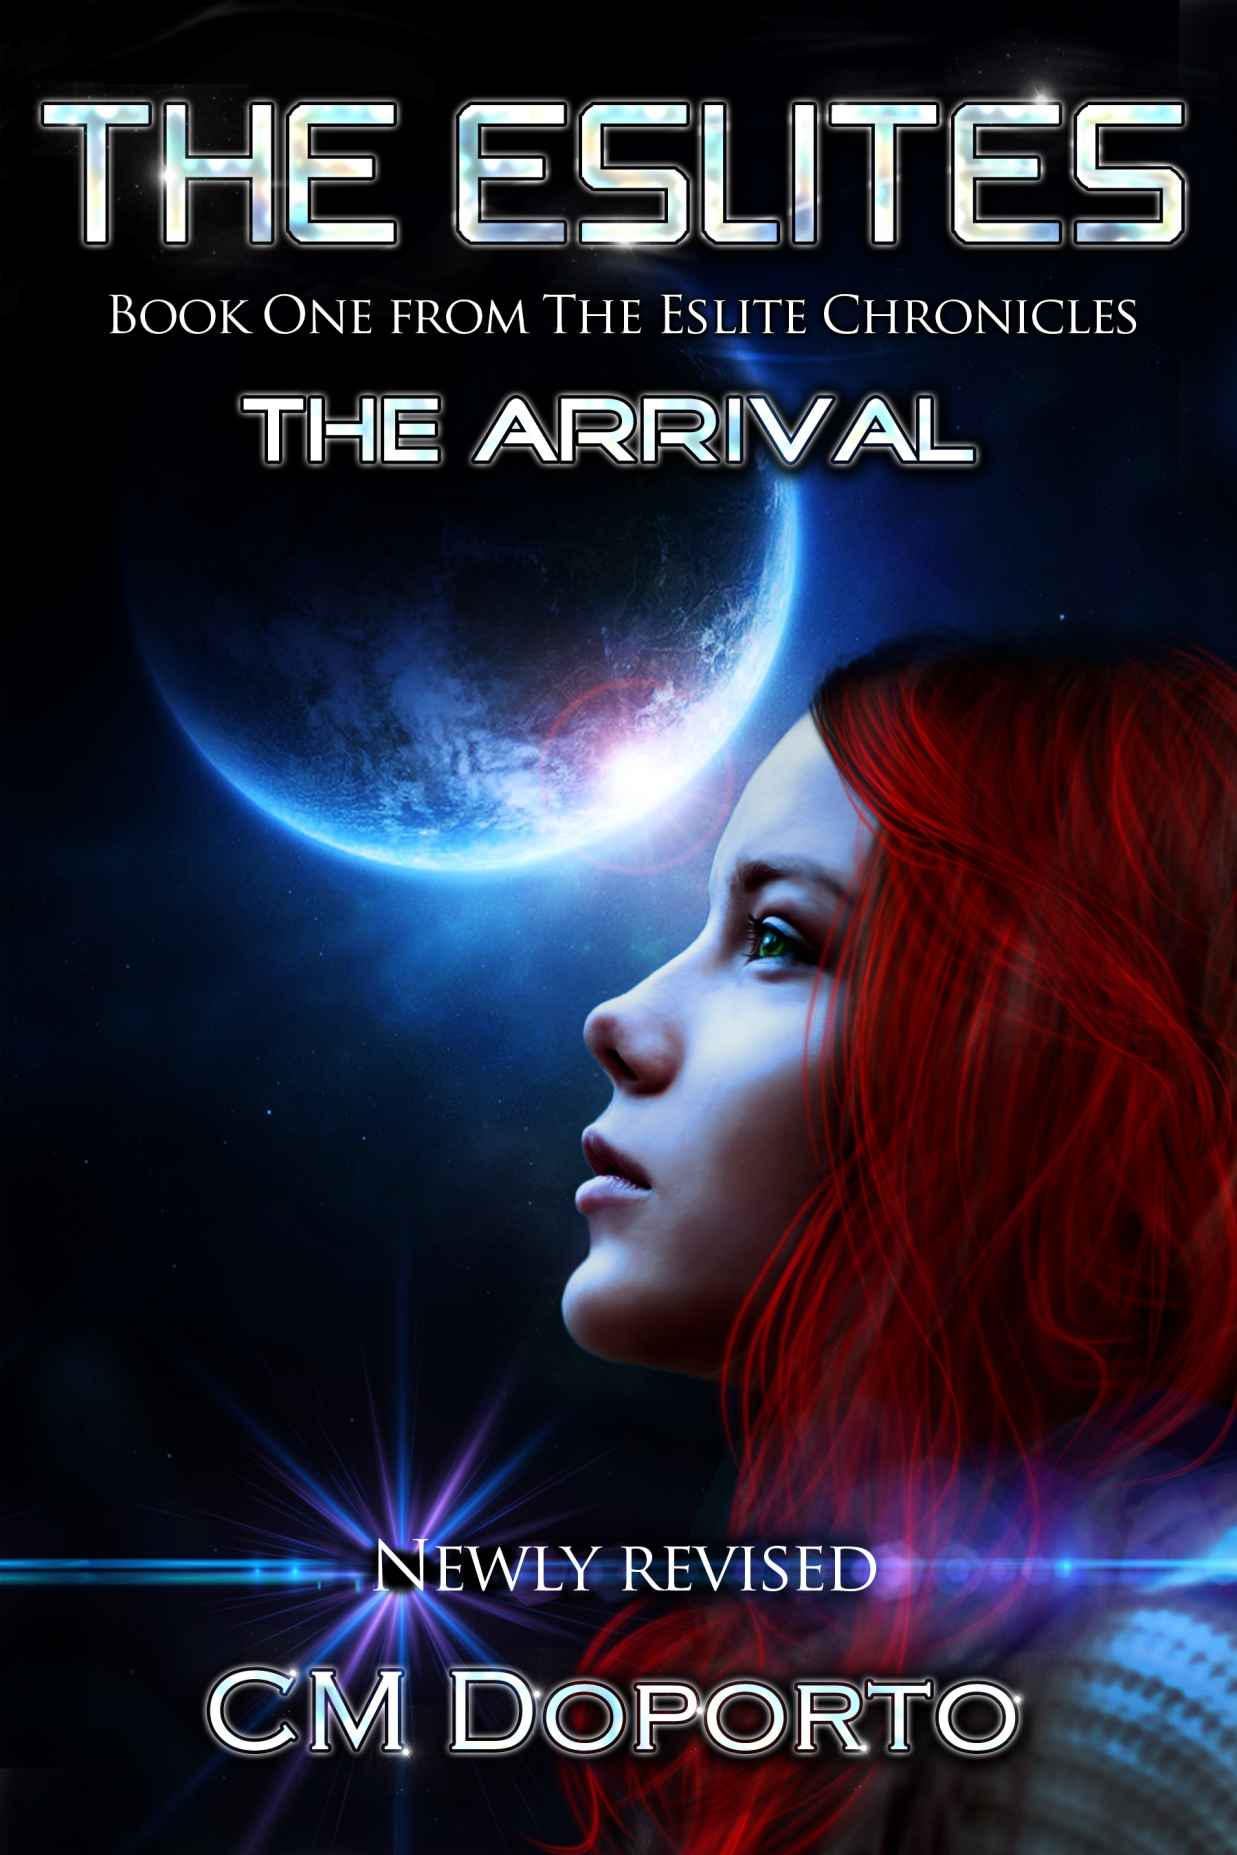 The Arrival by C.M. Doporto